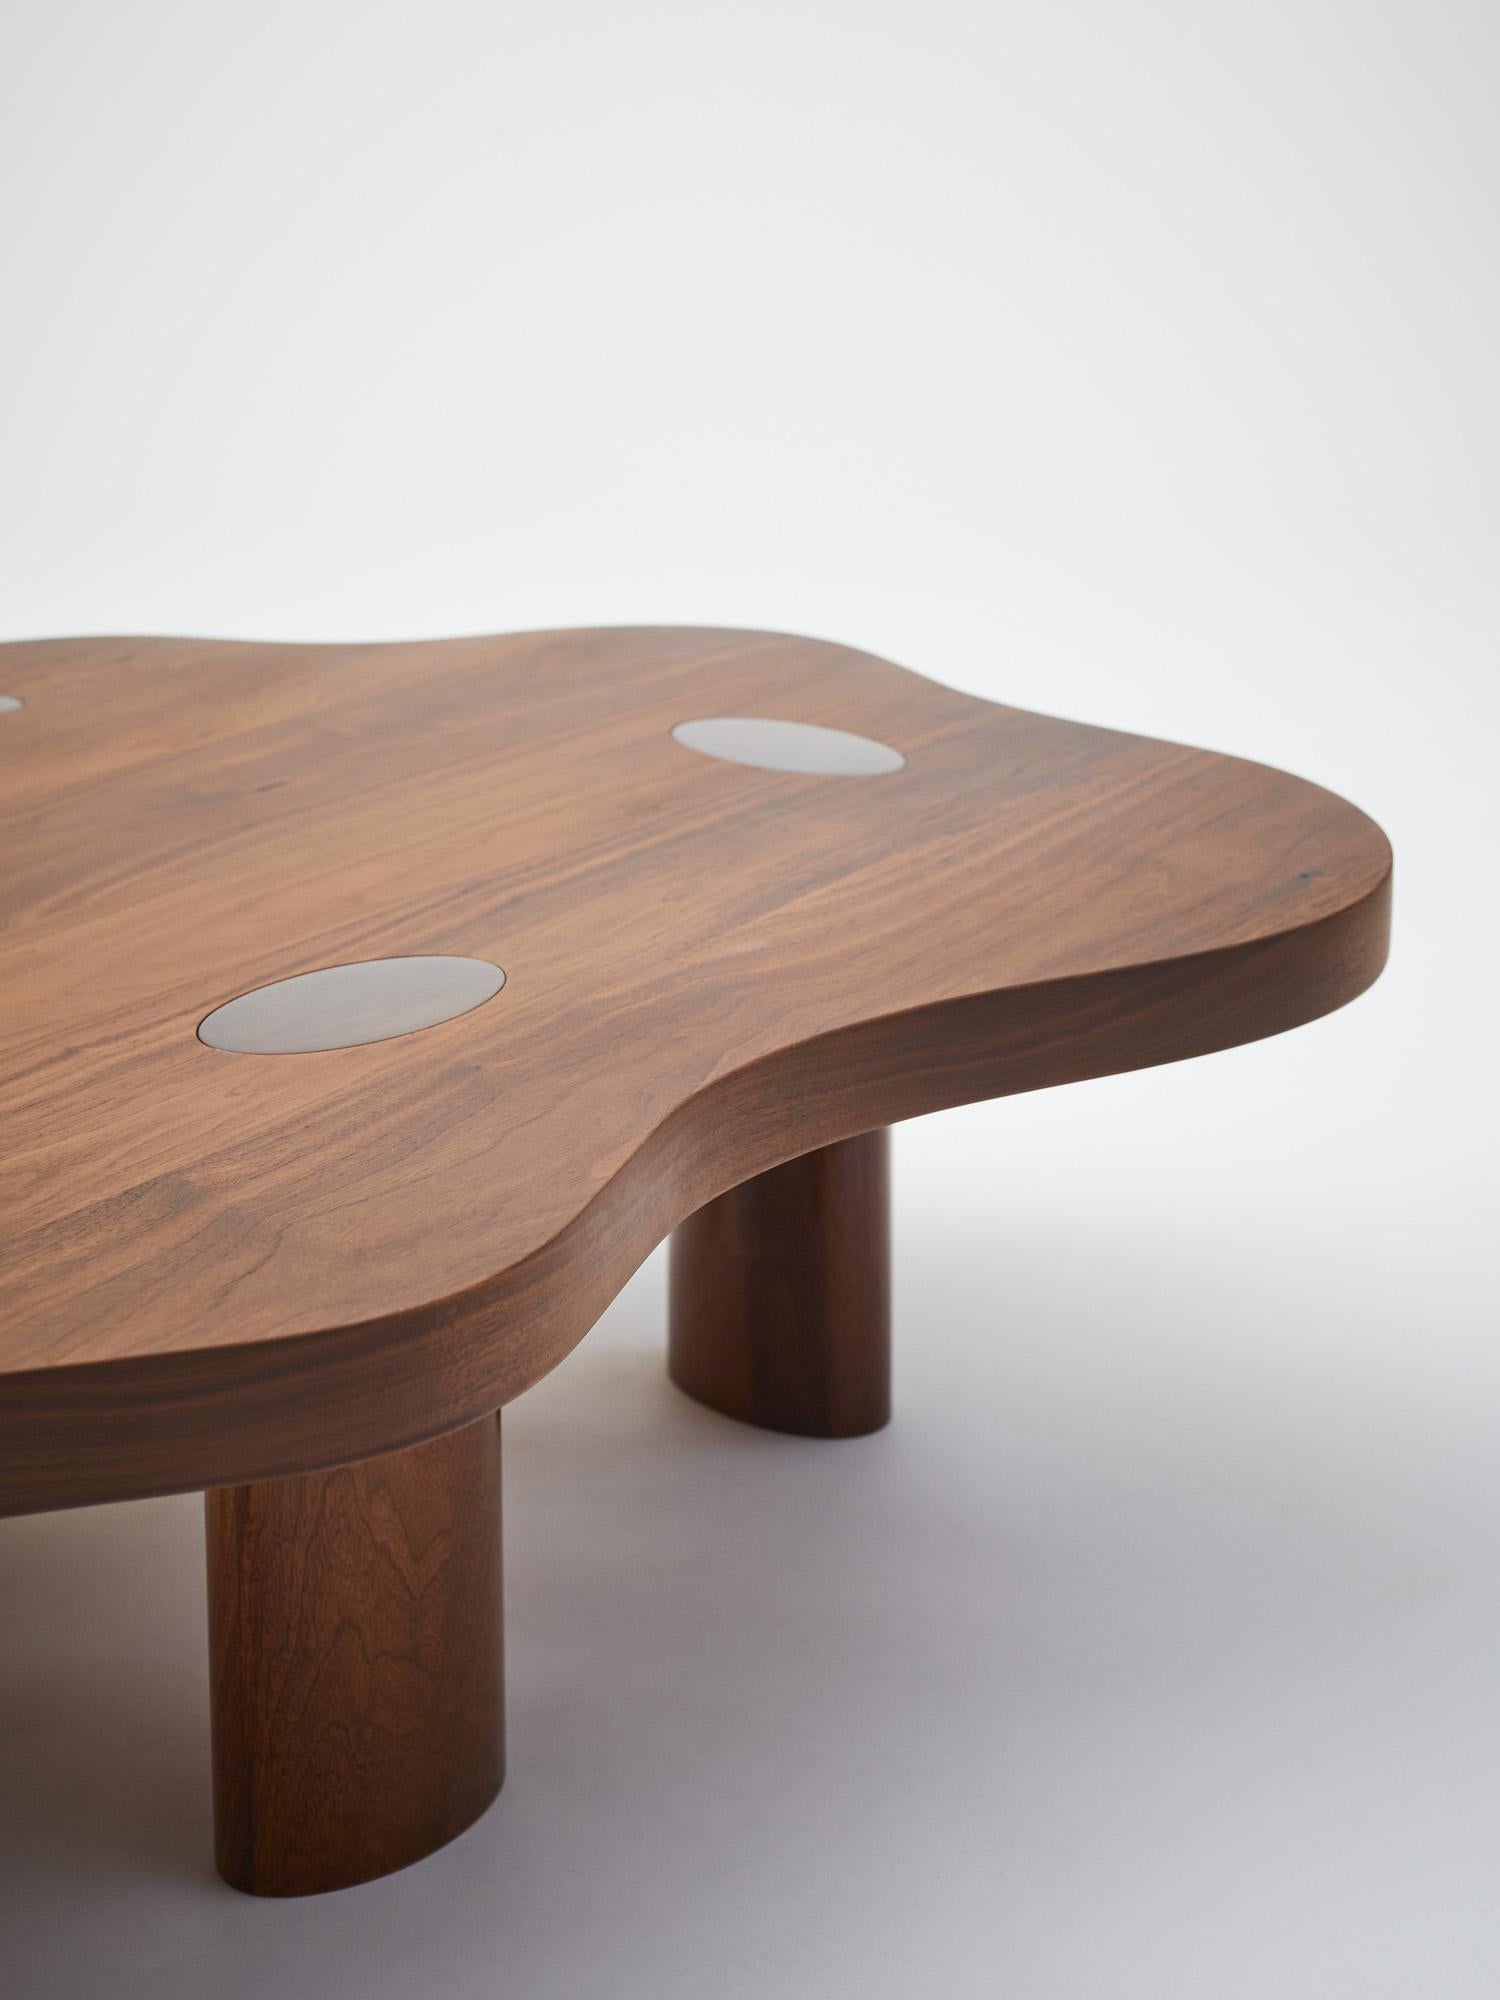 Cloud coffee table large in walnut finished with a satin clear coat / hi-gloss lacquer. 

Designed by Lousie Liljencrantz, Interior Designer based in Stockholm Sweden. 
Made in Sweden.